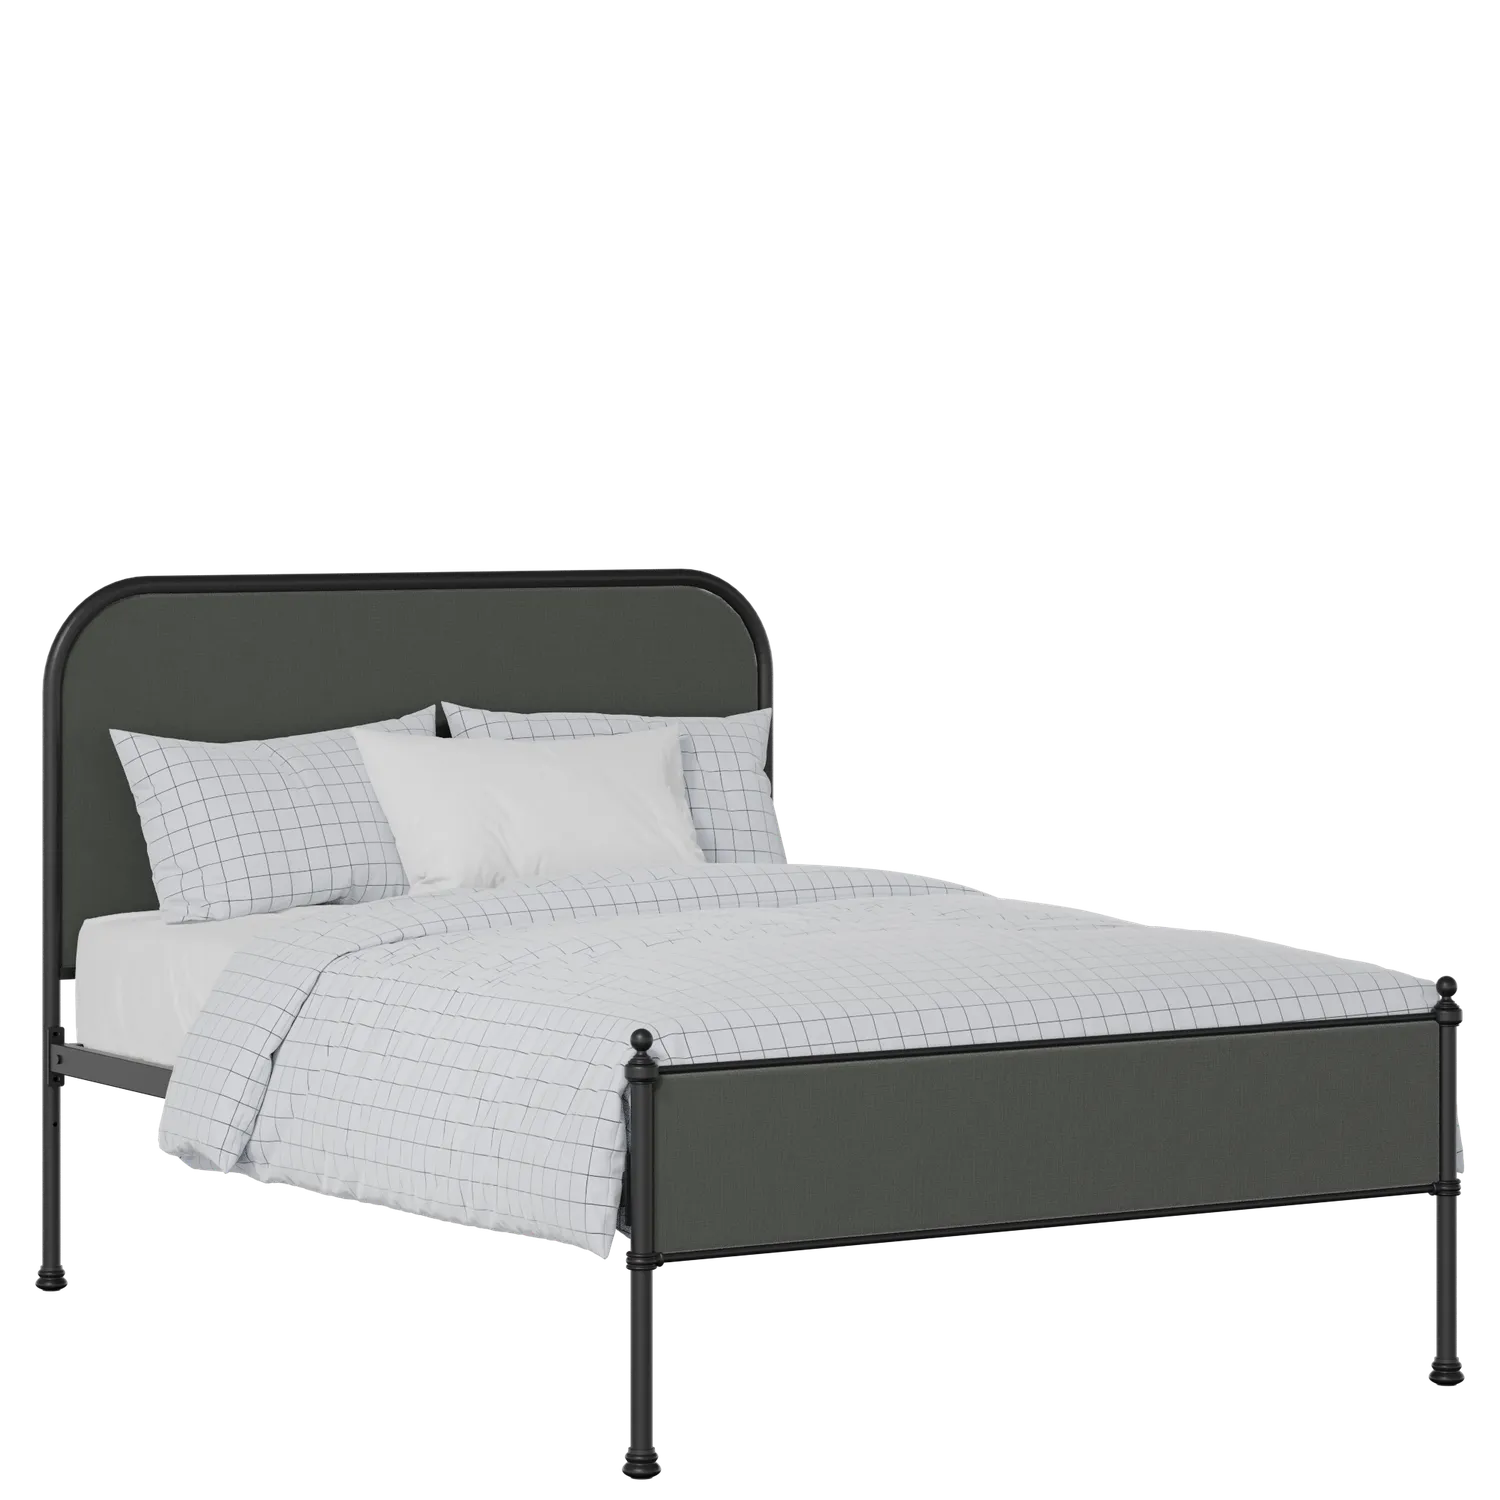 Bray Slim iron/metal upholstered bed in black with iron fabric